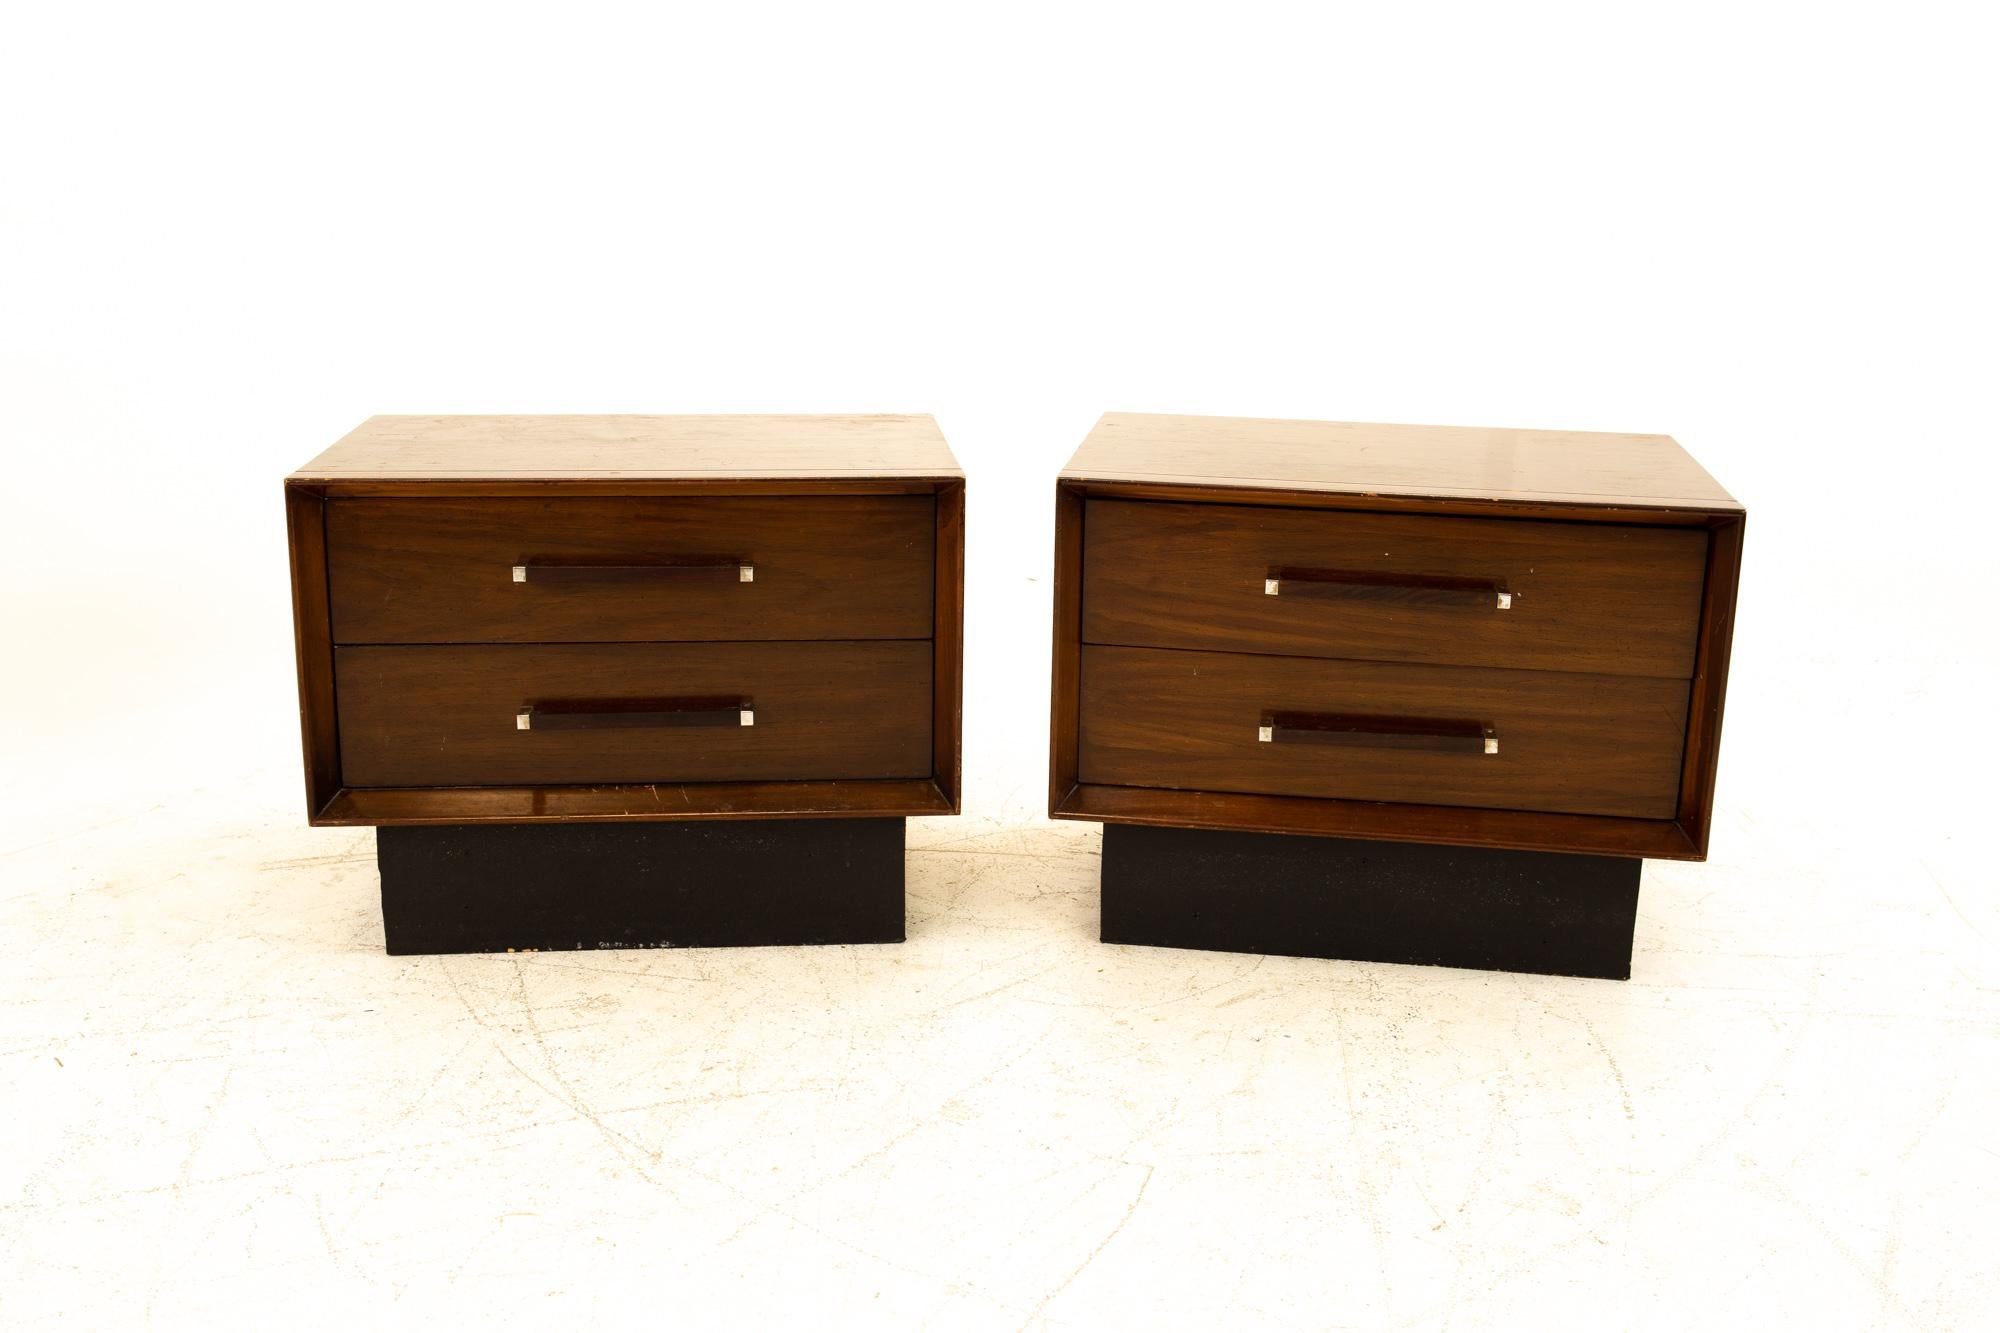 Lane Mid Century Rosewood Night stands - Pair
Each nightstand measures: 26 wide x 18 deep x 20 high

All pieces of furniture can be had in what we call Restored Vintage Condition. That means the piece is restored upon purchase so it’s free of